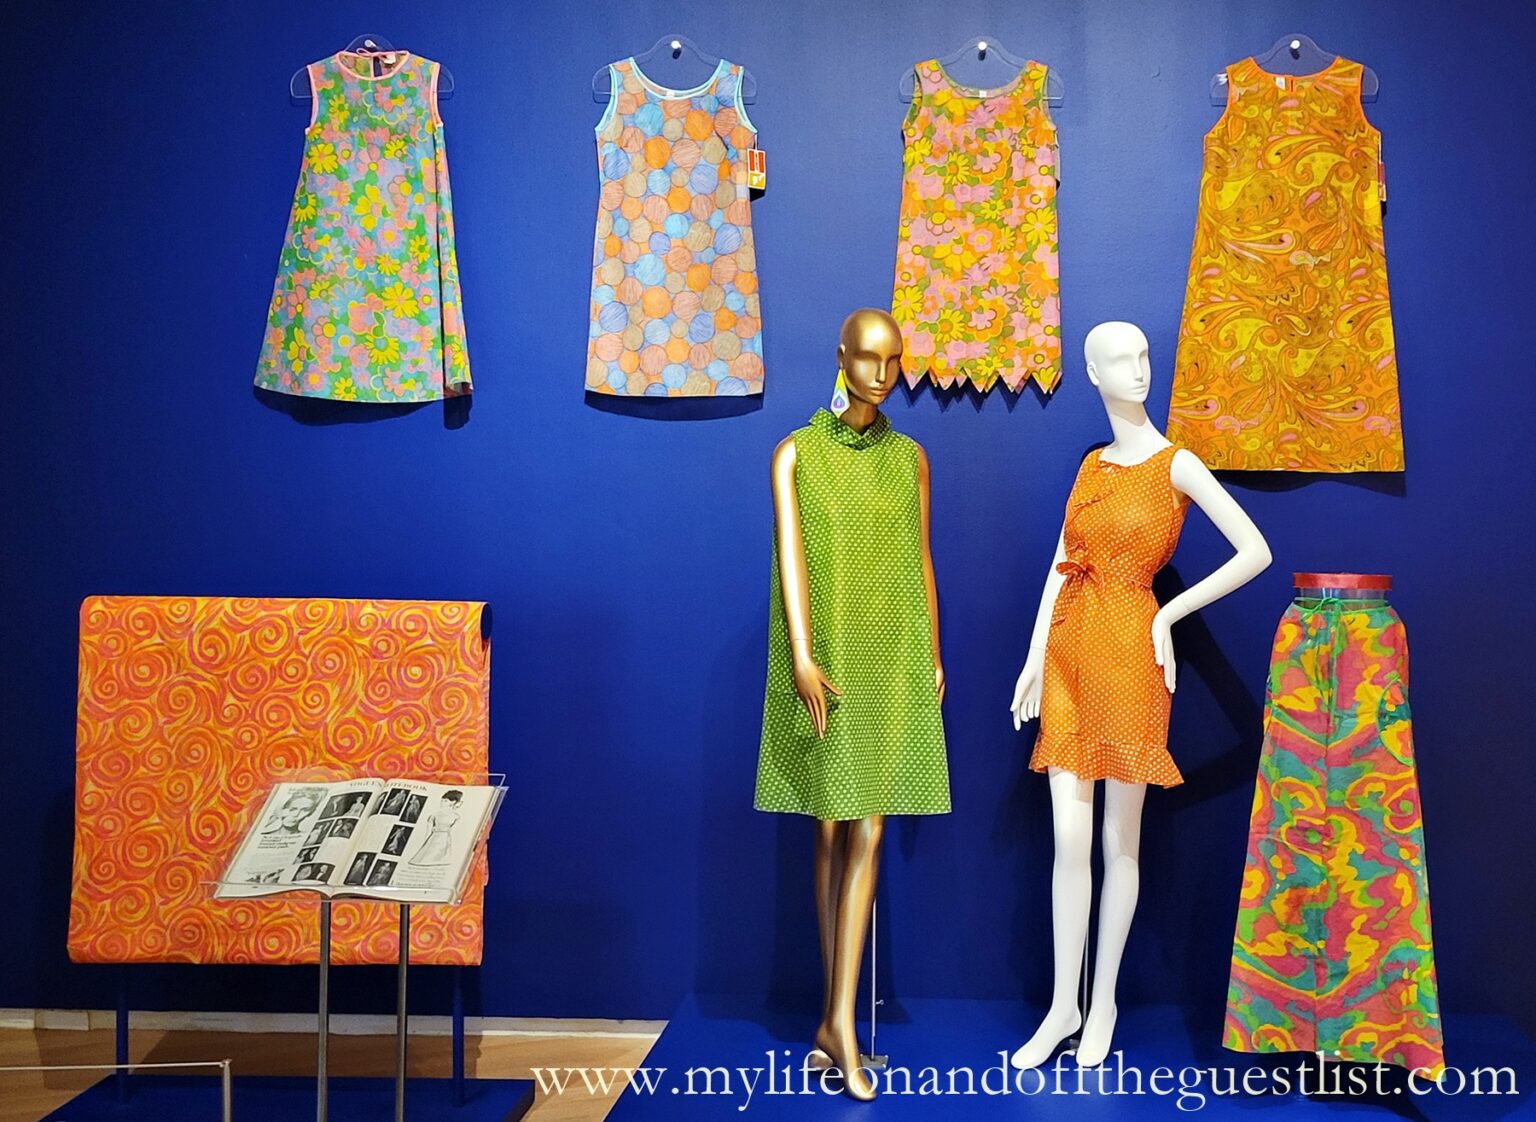 Generation Paper: The Fashion Phenom Paper Dress of the 1960s